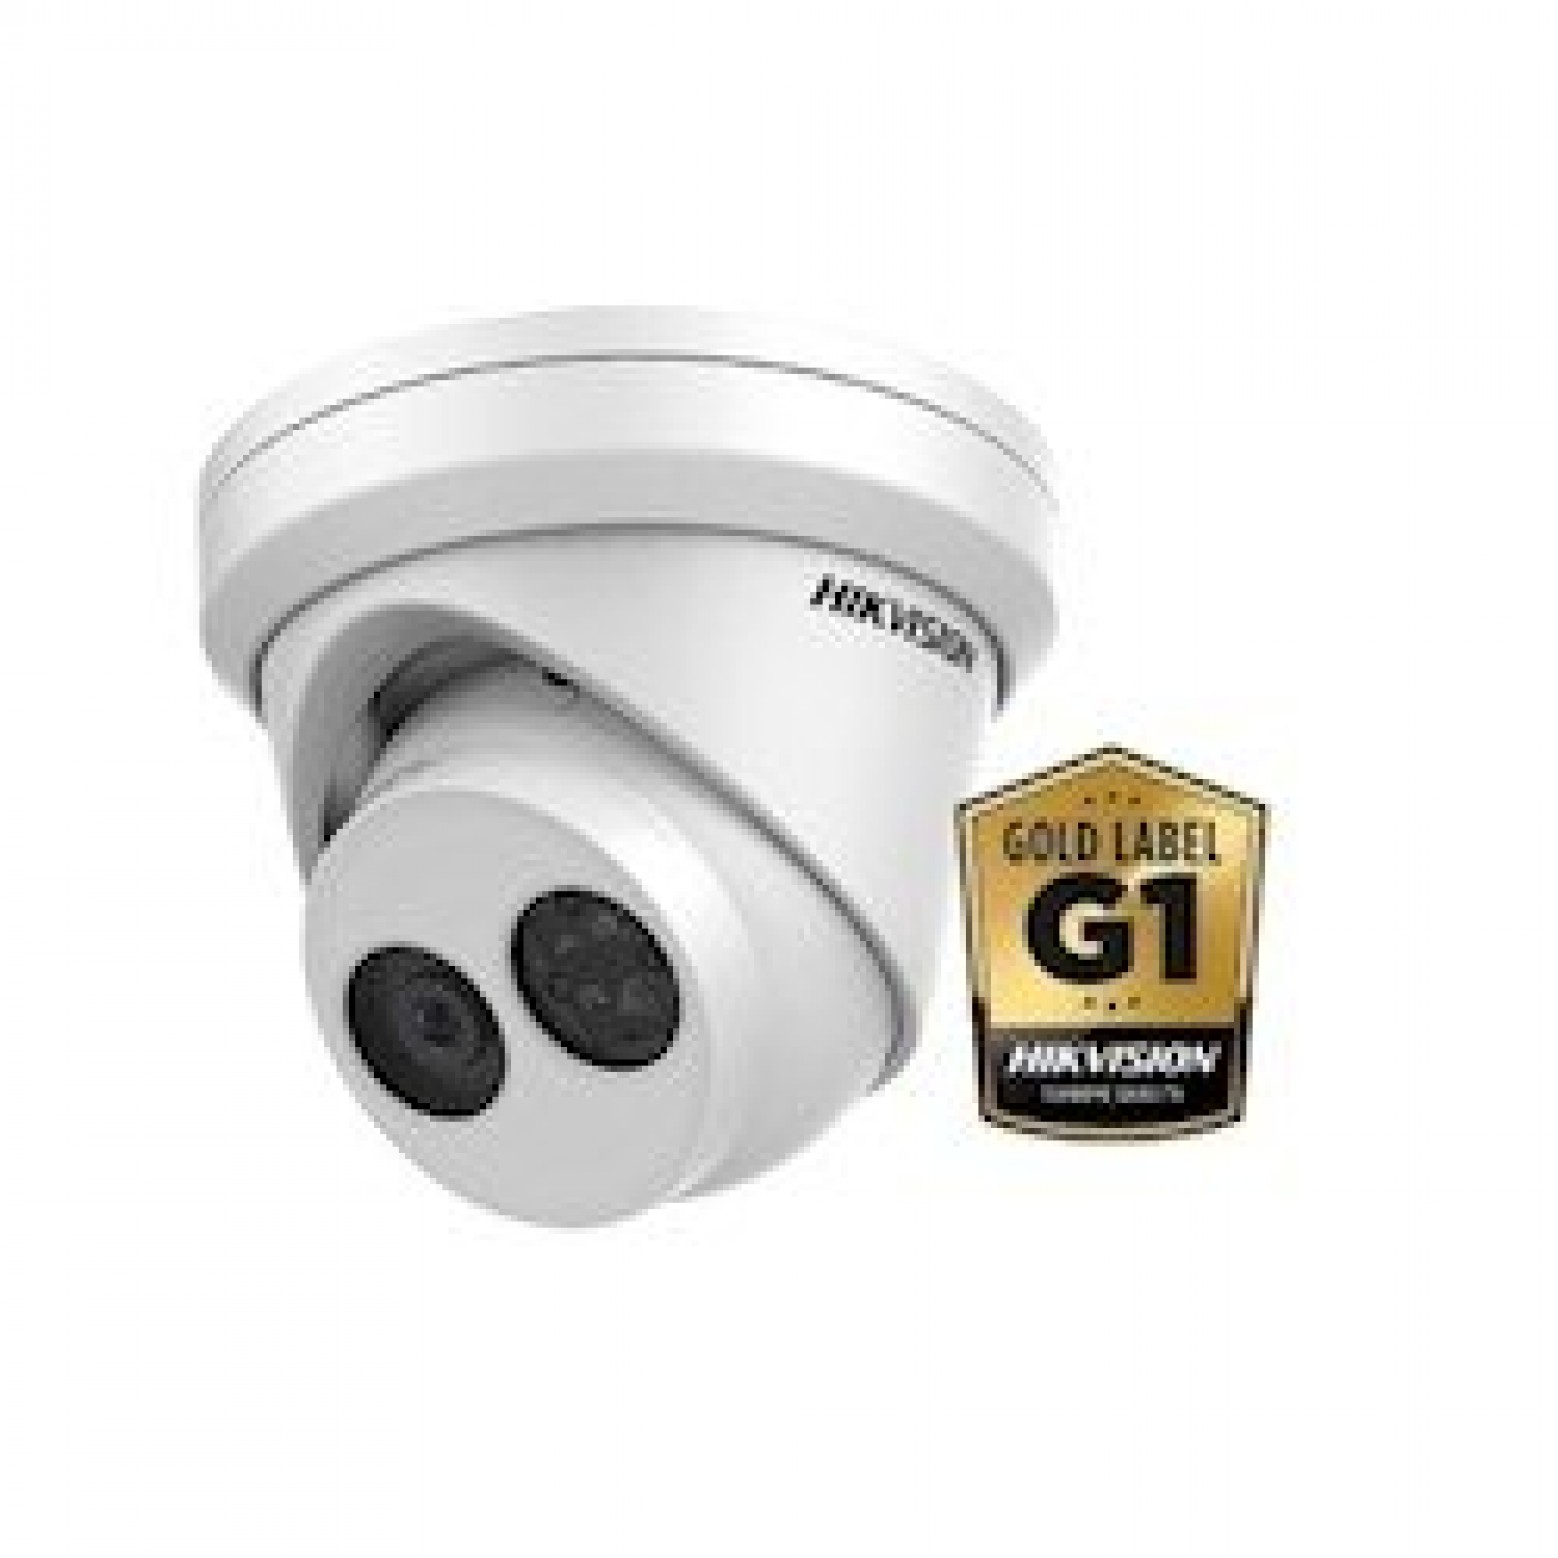 Hikvision DS-2CD2345FWD-I, Gouden Label, EXIR Dome, 4MP, 30m IR, WDR, Ultra-Laag Licht